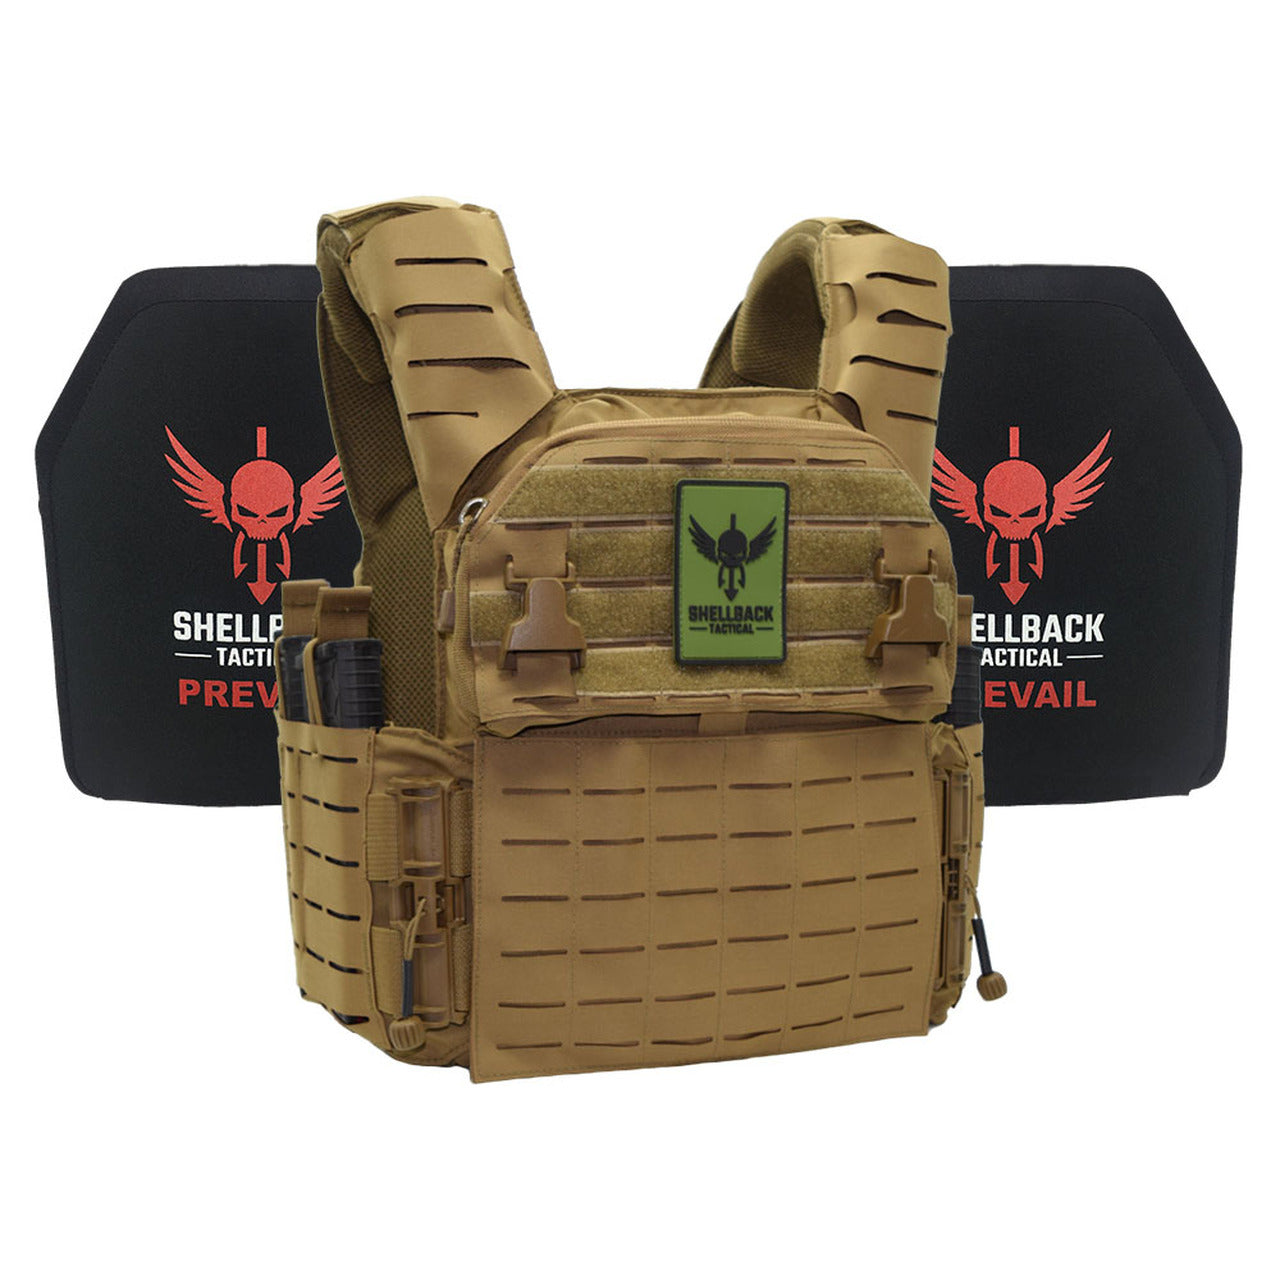 A close up of a Shellback Tactical Banshee Elite 3.0 Active Shooter Kit with Level IV 1155 Plates vest.